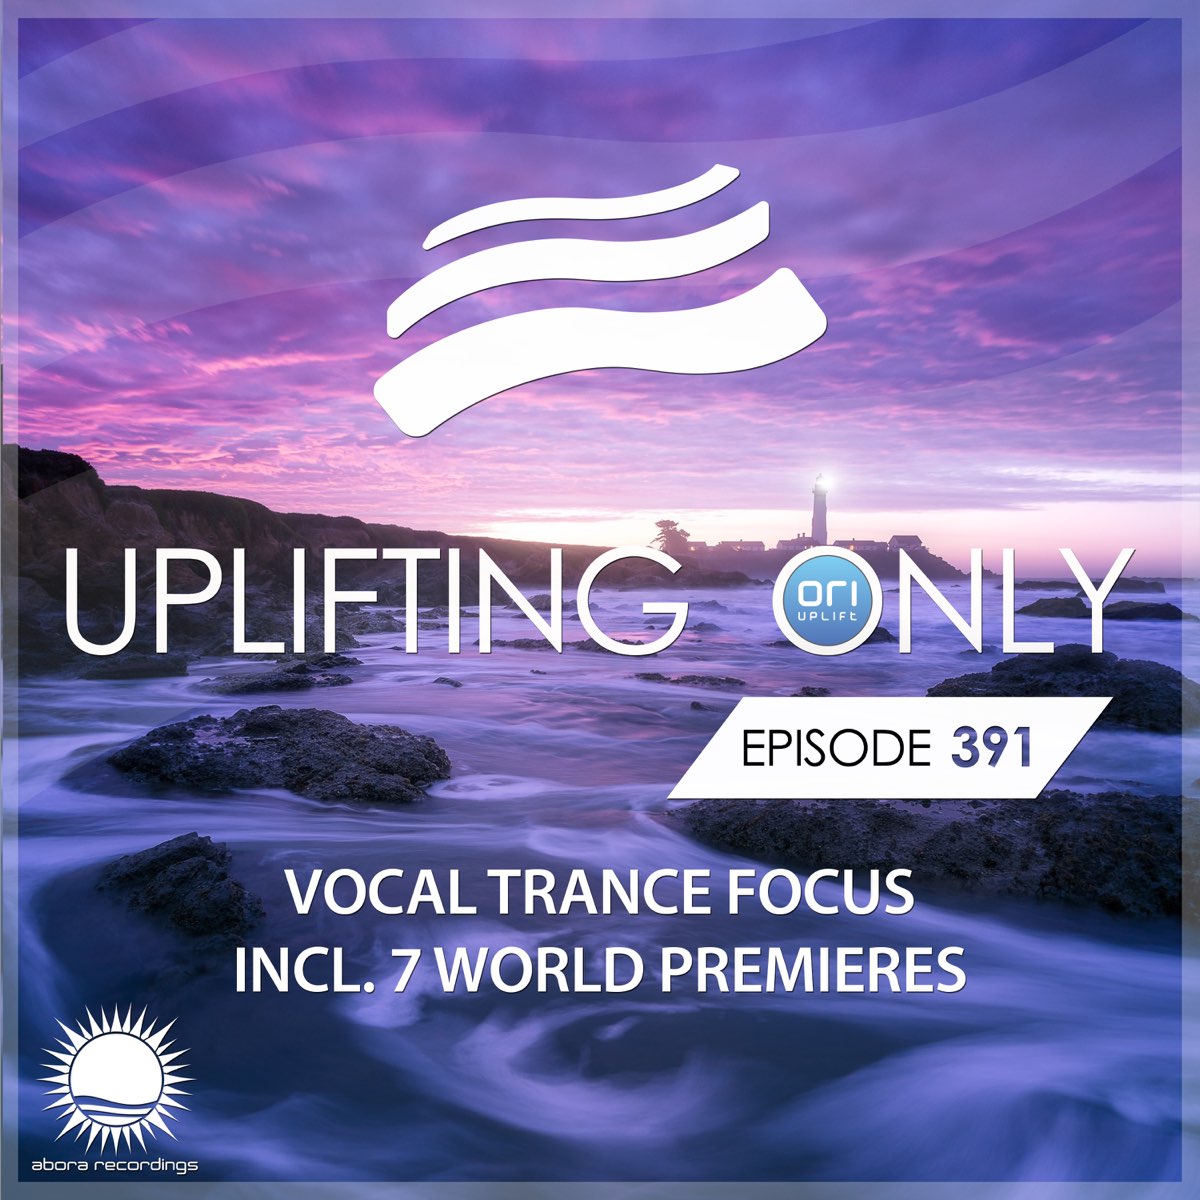 Only ep. Uplifting. Uplifting only Episode 569 Vocal Trance Focus. Simply Drew & Sara Fray – Fishes.